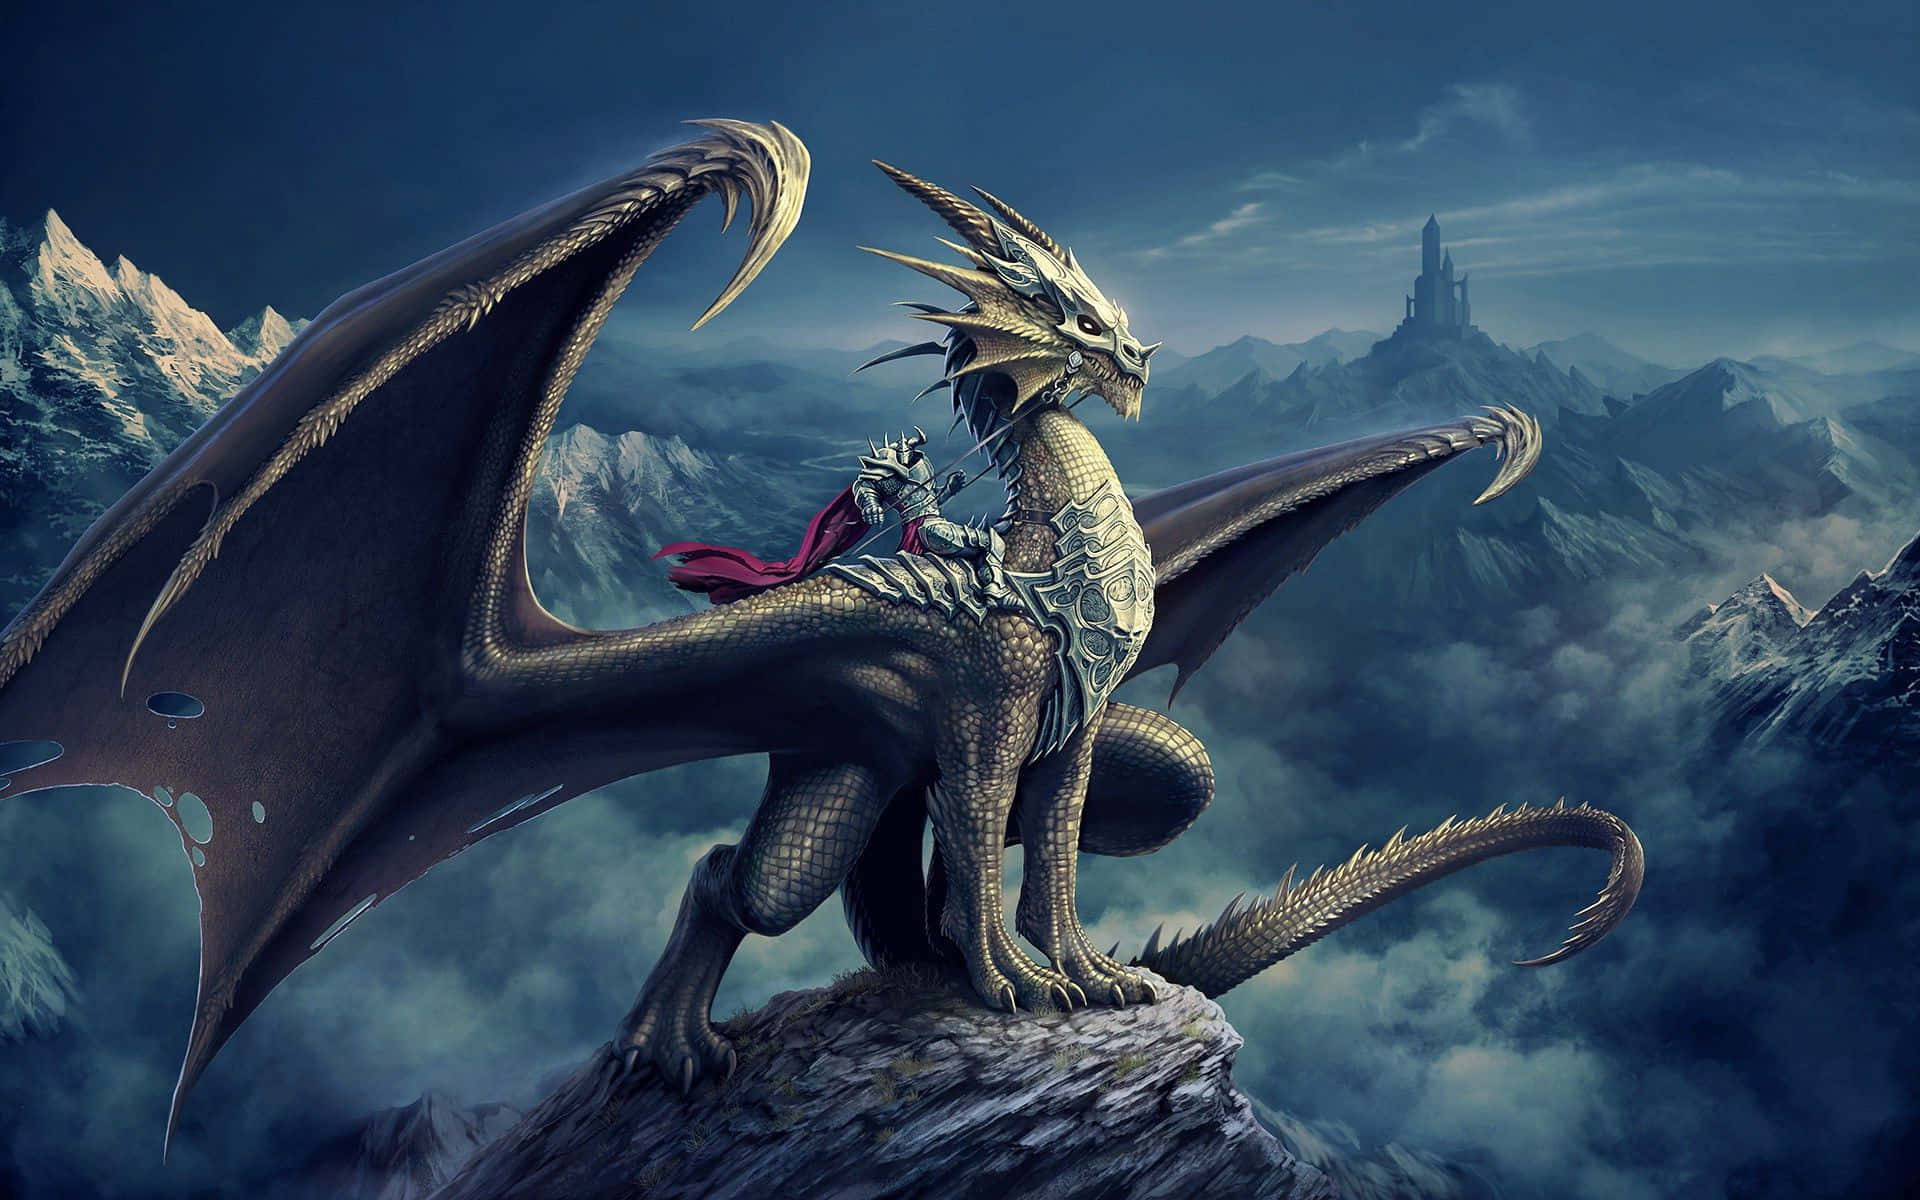 Awesome Cool Dragon soaring in the night sky Wallpaper